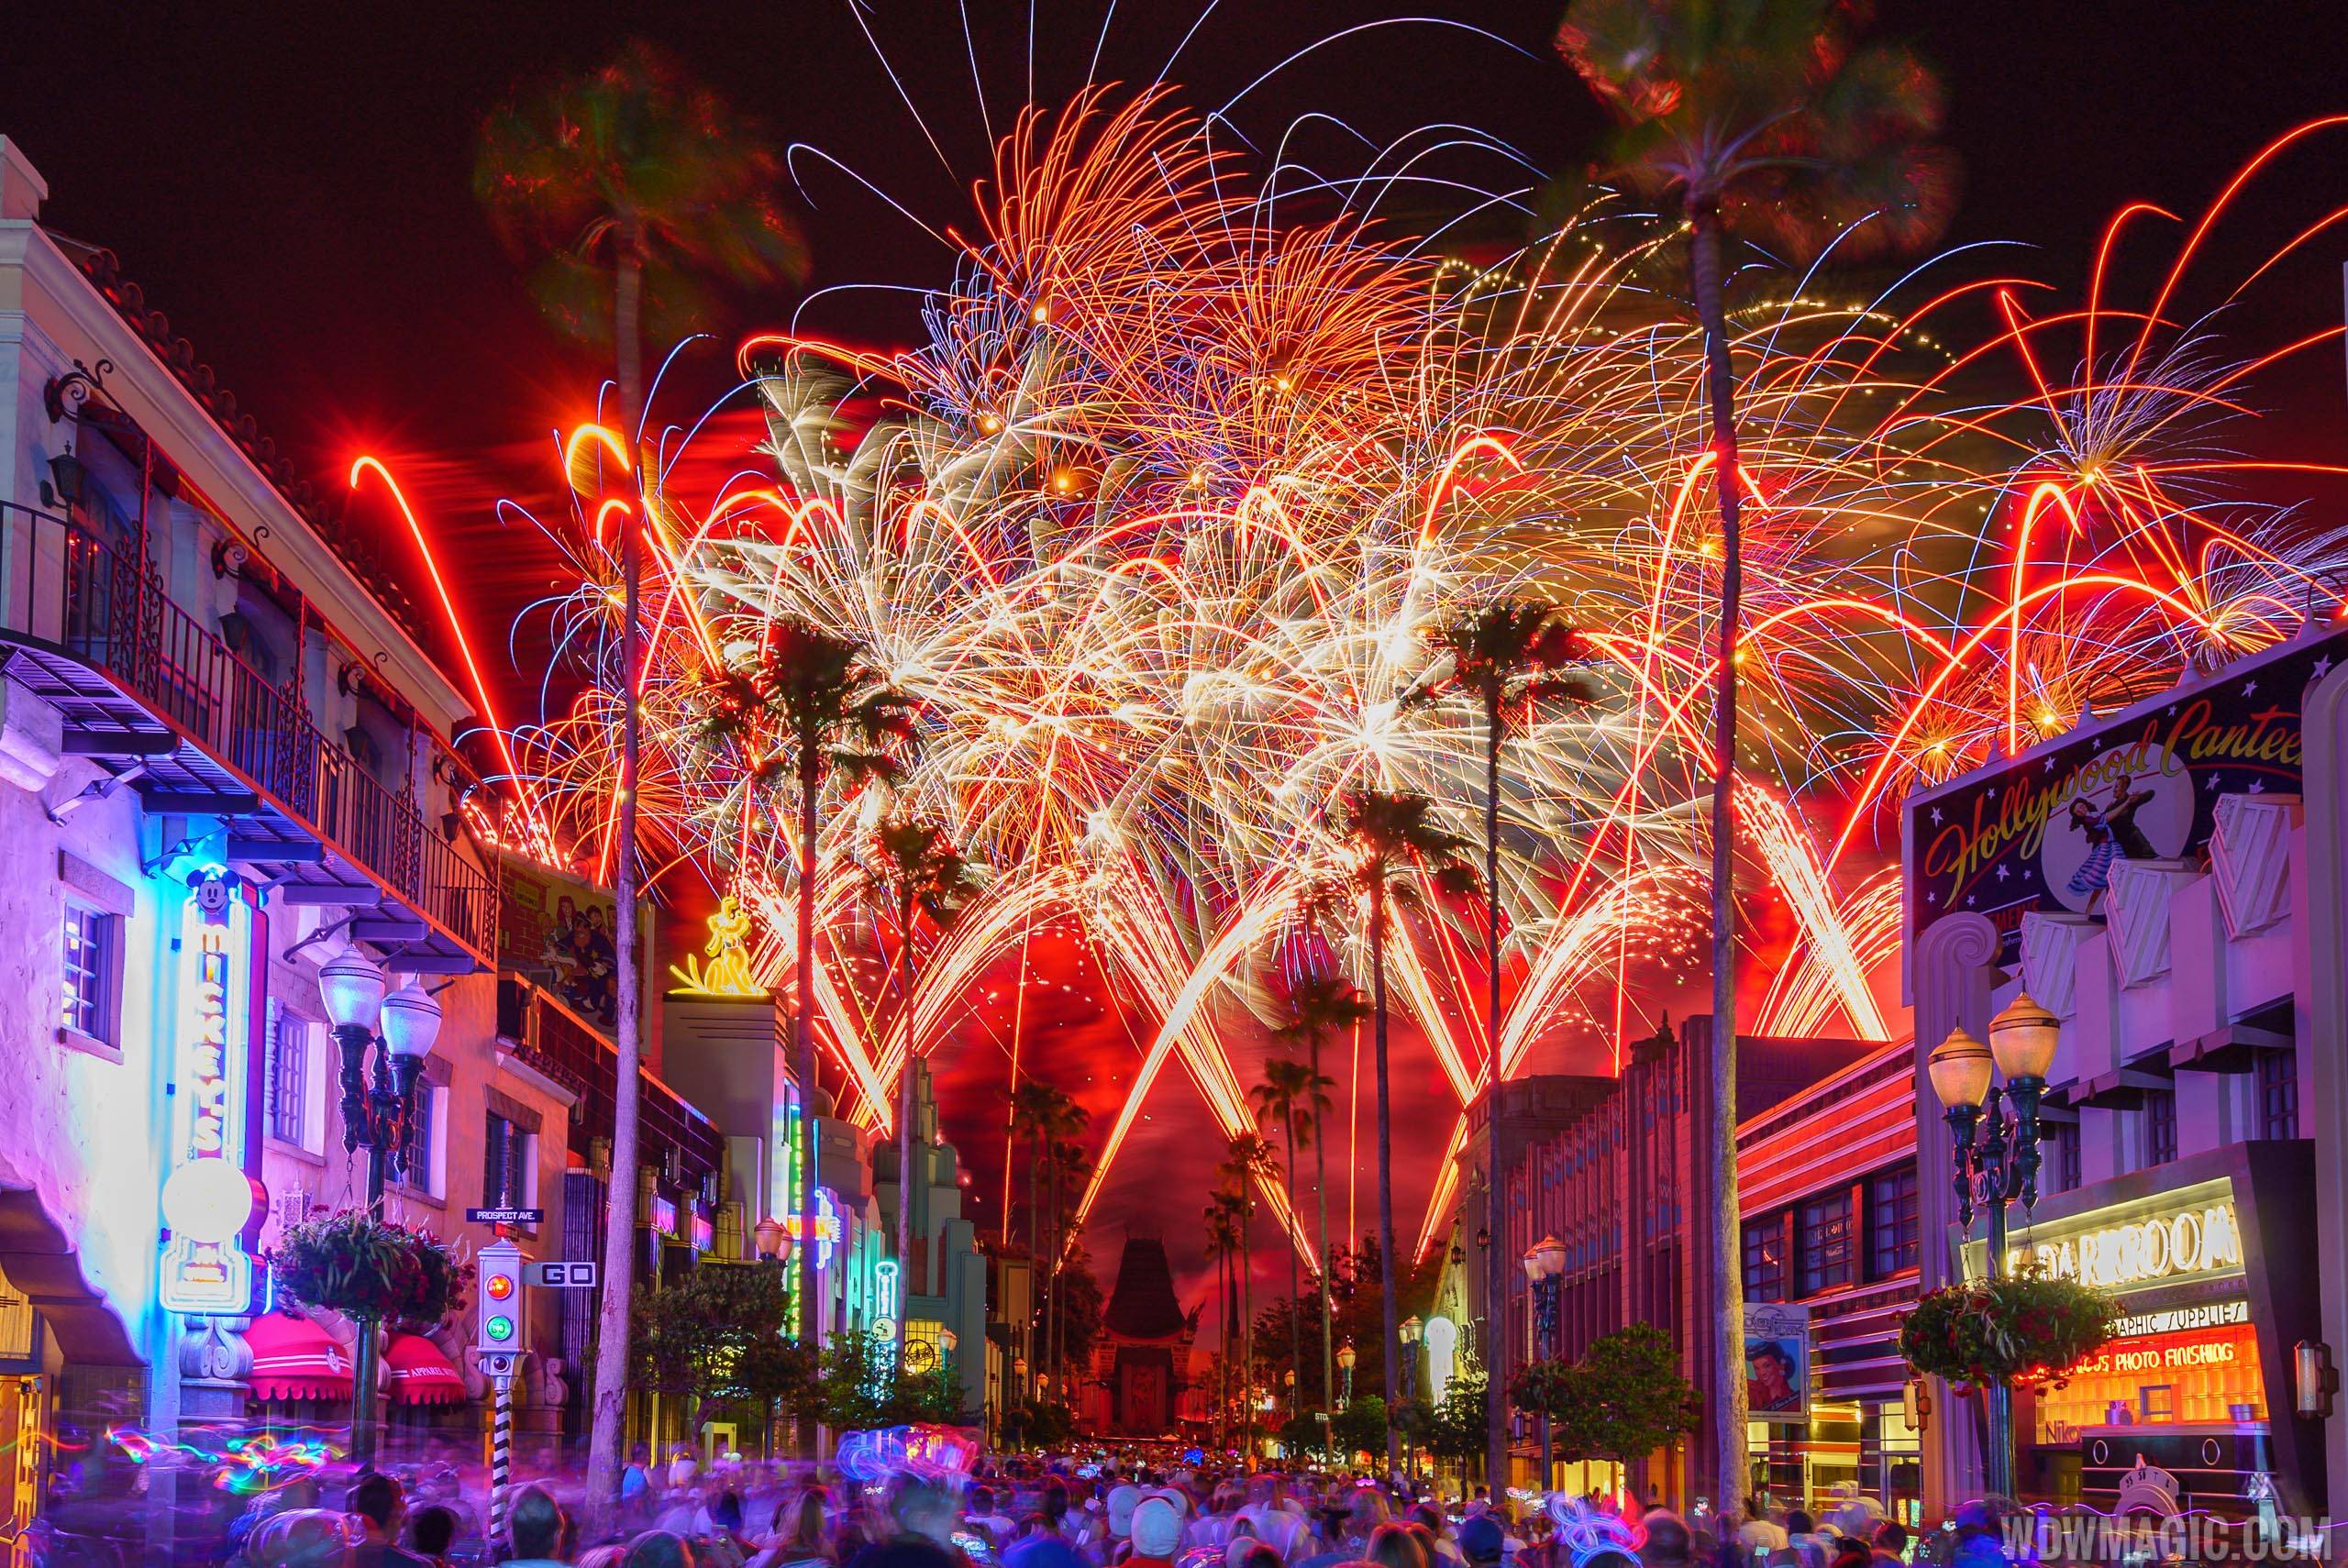 Schedule released for new year performances of Symphony in the Stars at Disney's Hollywood Studios